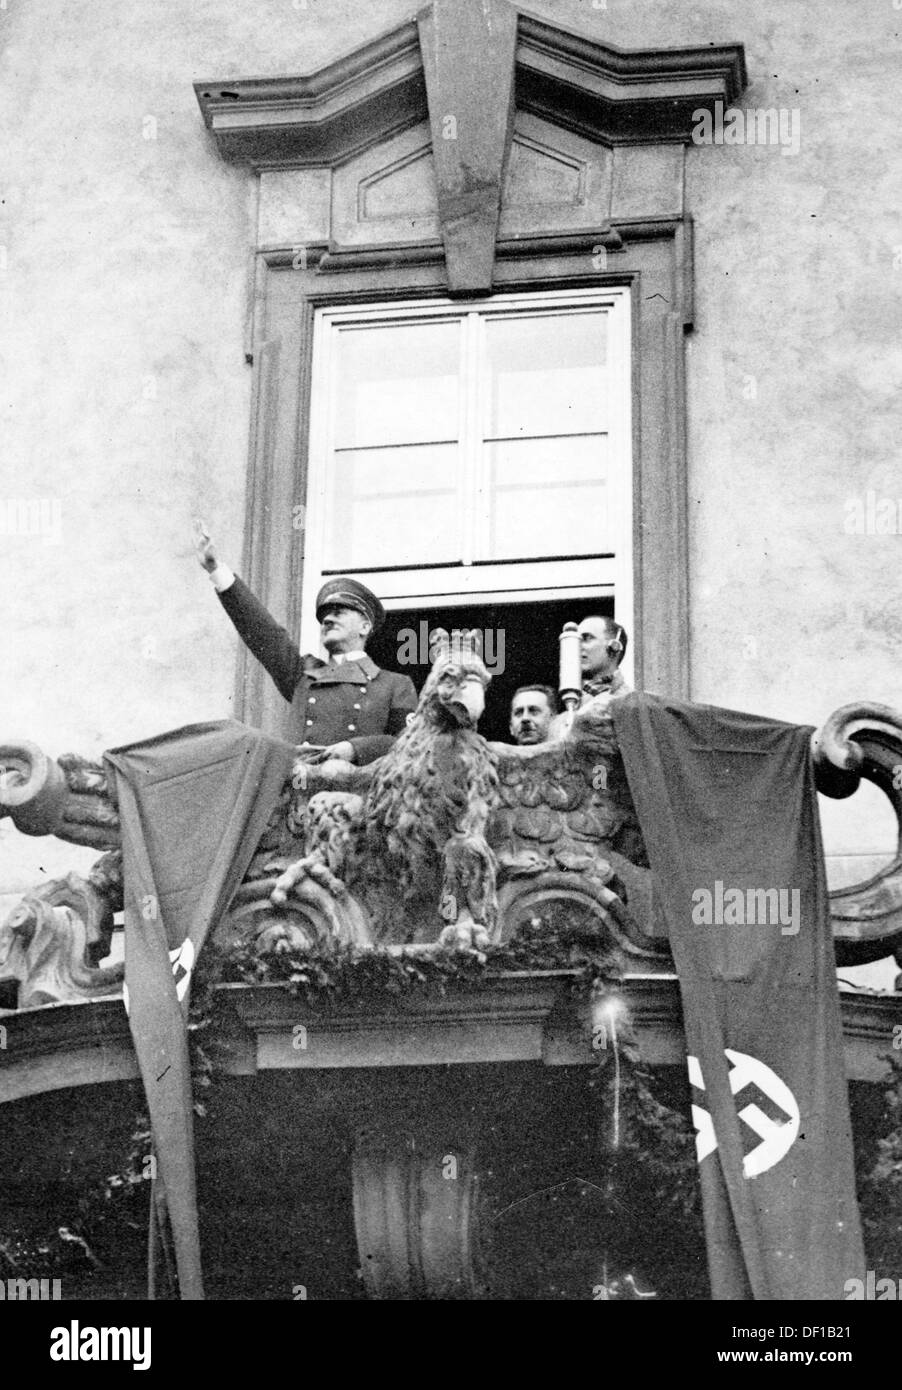 The image from the Nazi Propaganda! shows Adolf HItler on the balcony of the city hall of Brünn, Czech Republic, on 18 March 1939. Three days earlier, the protectorate Bohemia and Moravia were established after the invaions of German troops into the territories that had been independent before. Fotoarchiv für Zeitgeschichte Stock Photo